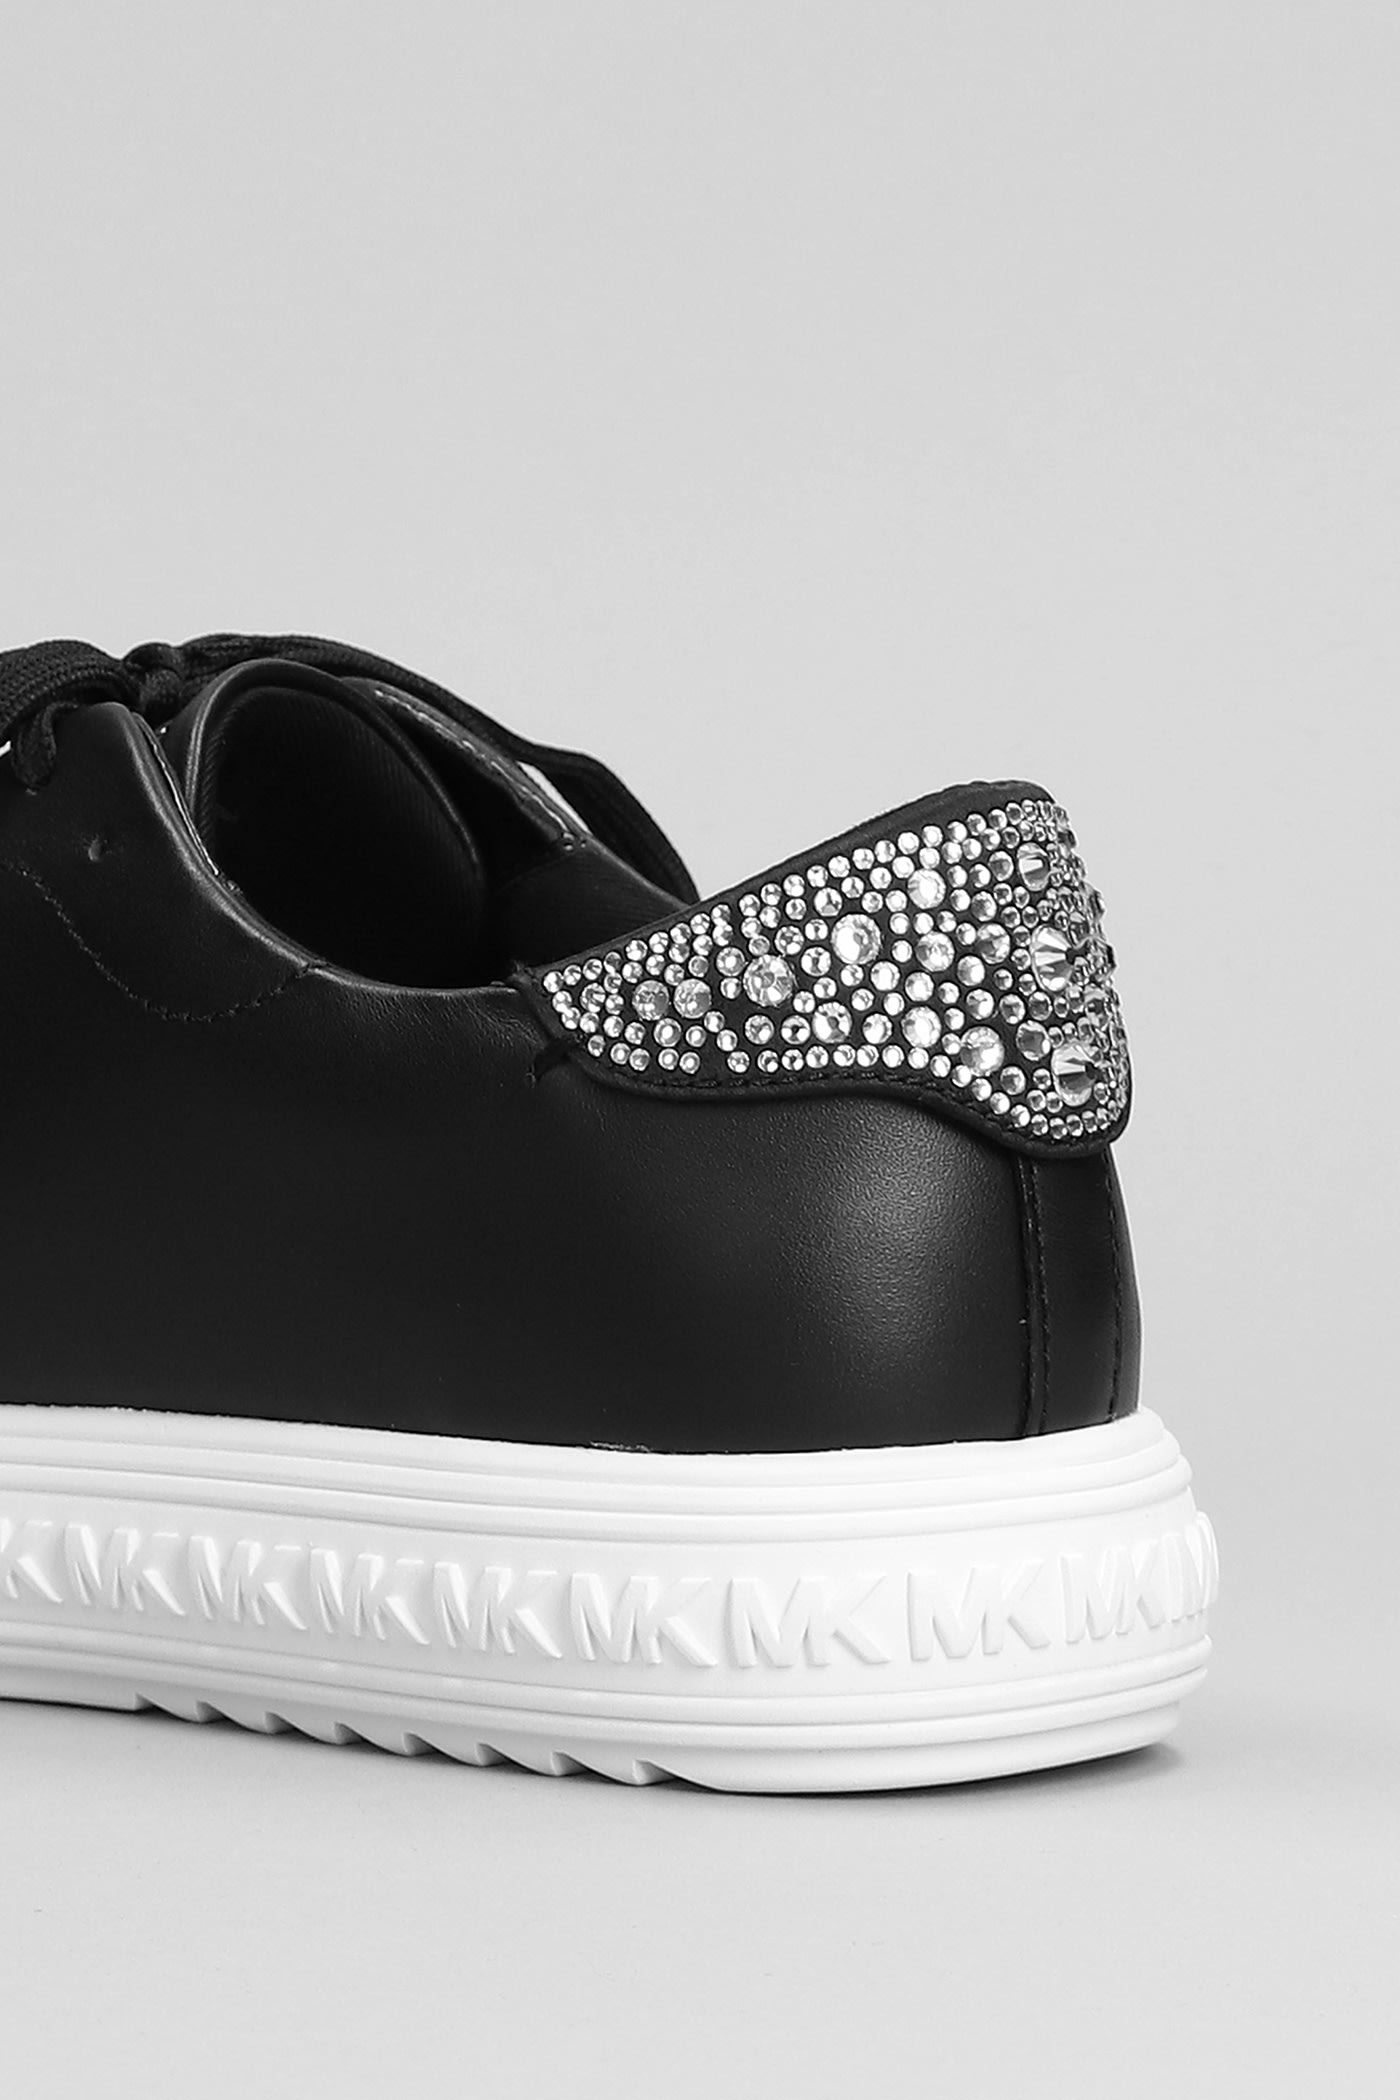 Shop Michael Kors Grove Lake Up Sneakers In Black Leather And Fabric